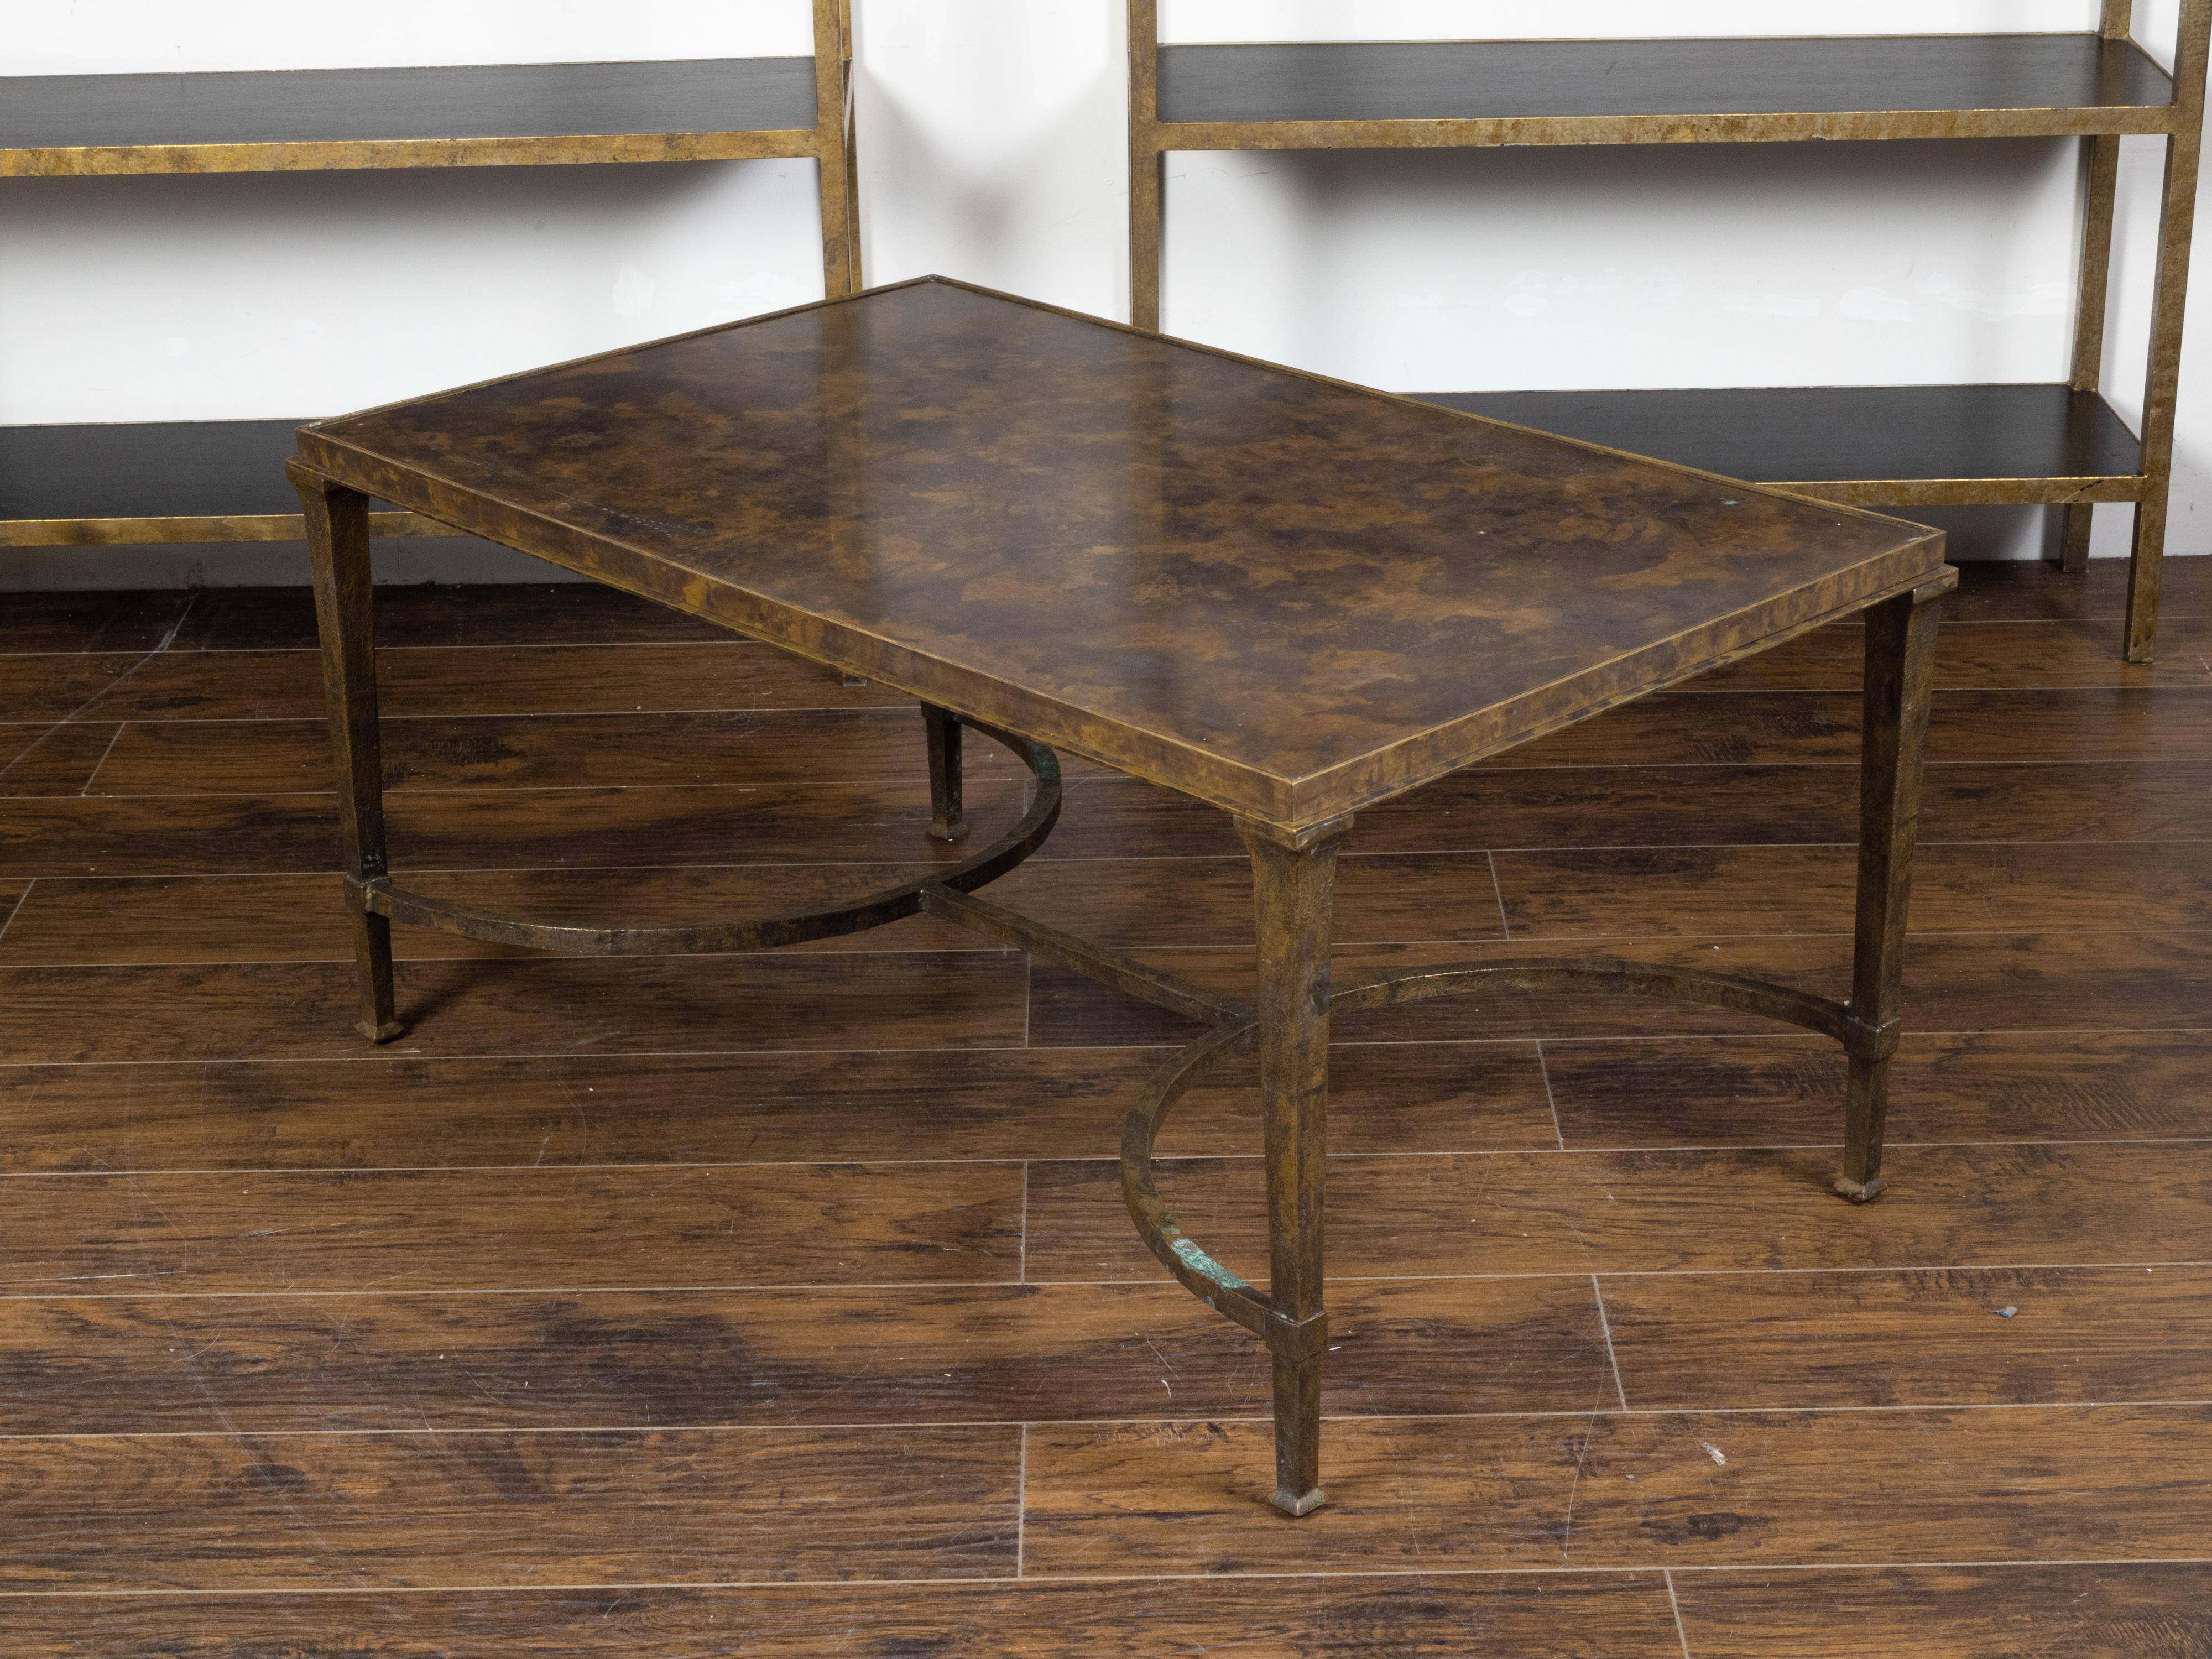 Midcentury Bronze Coffee Table with Marbleized Top and Half-Moon Stretcher For Sale 5